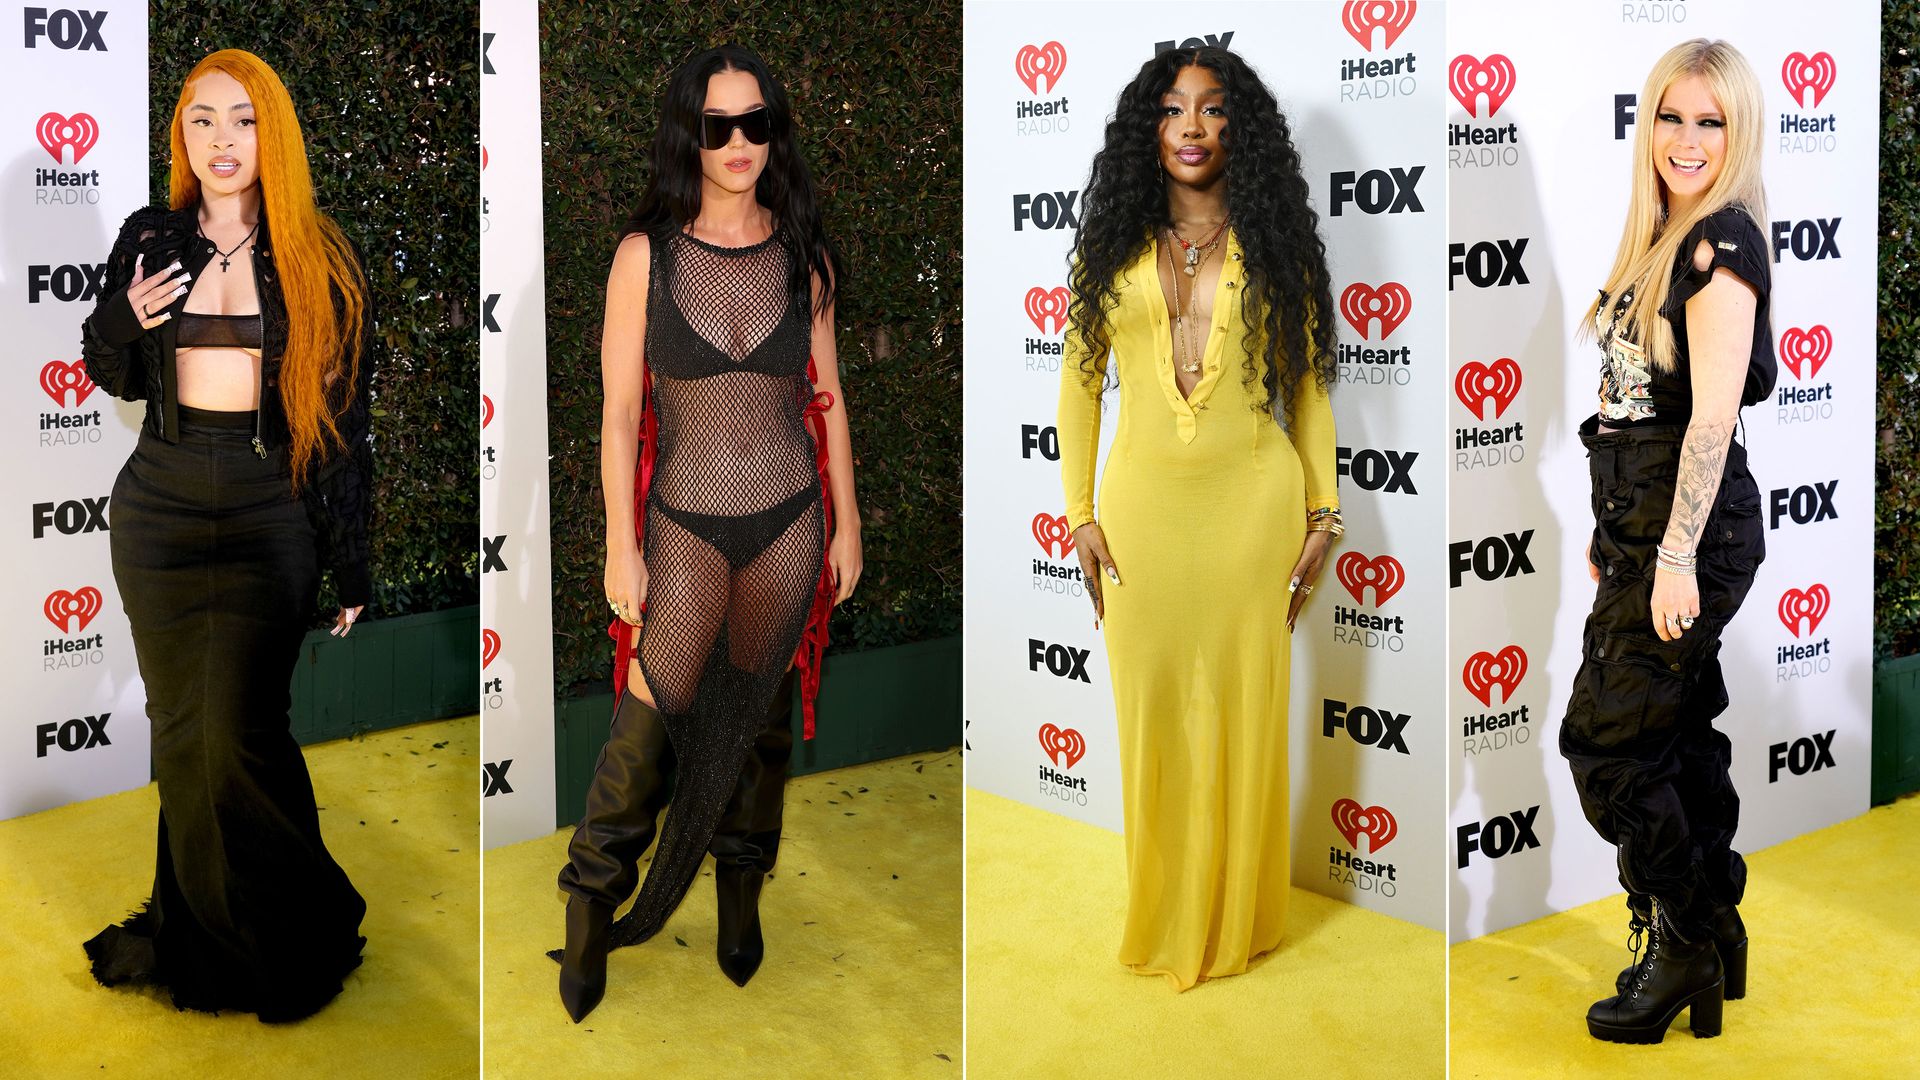 Ice Spice, Katy Perry, SZA and Avril Lavigne at the iHeart Radio Awards